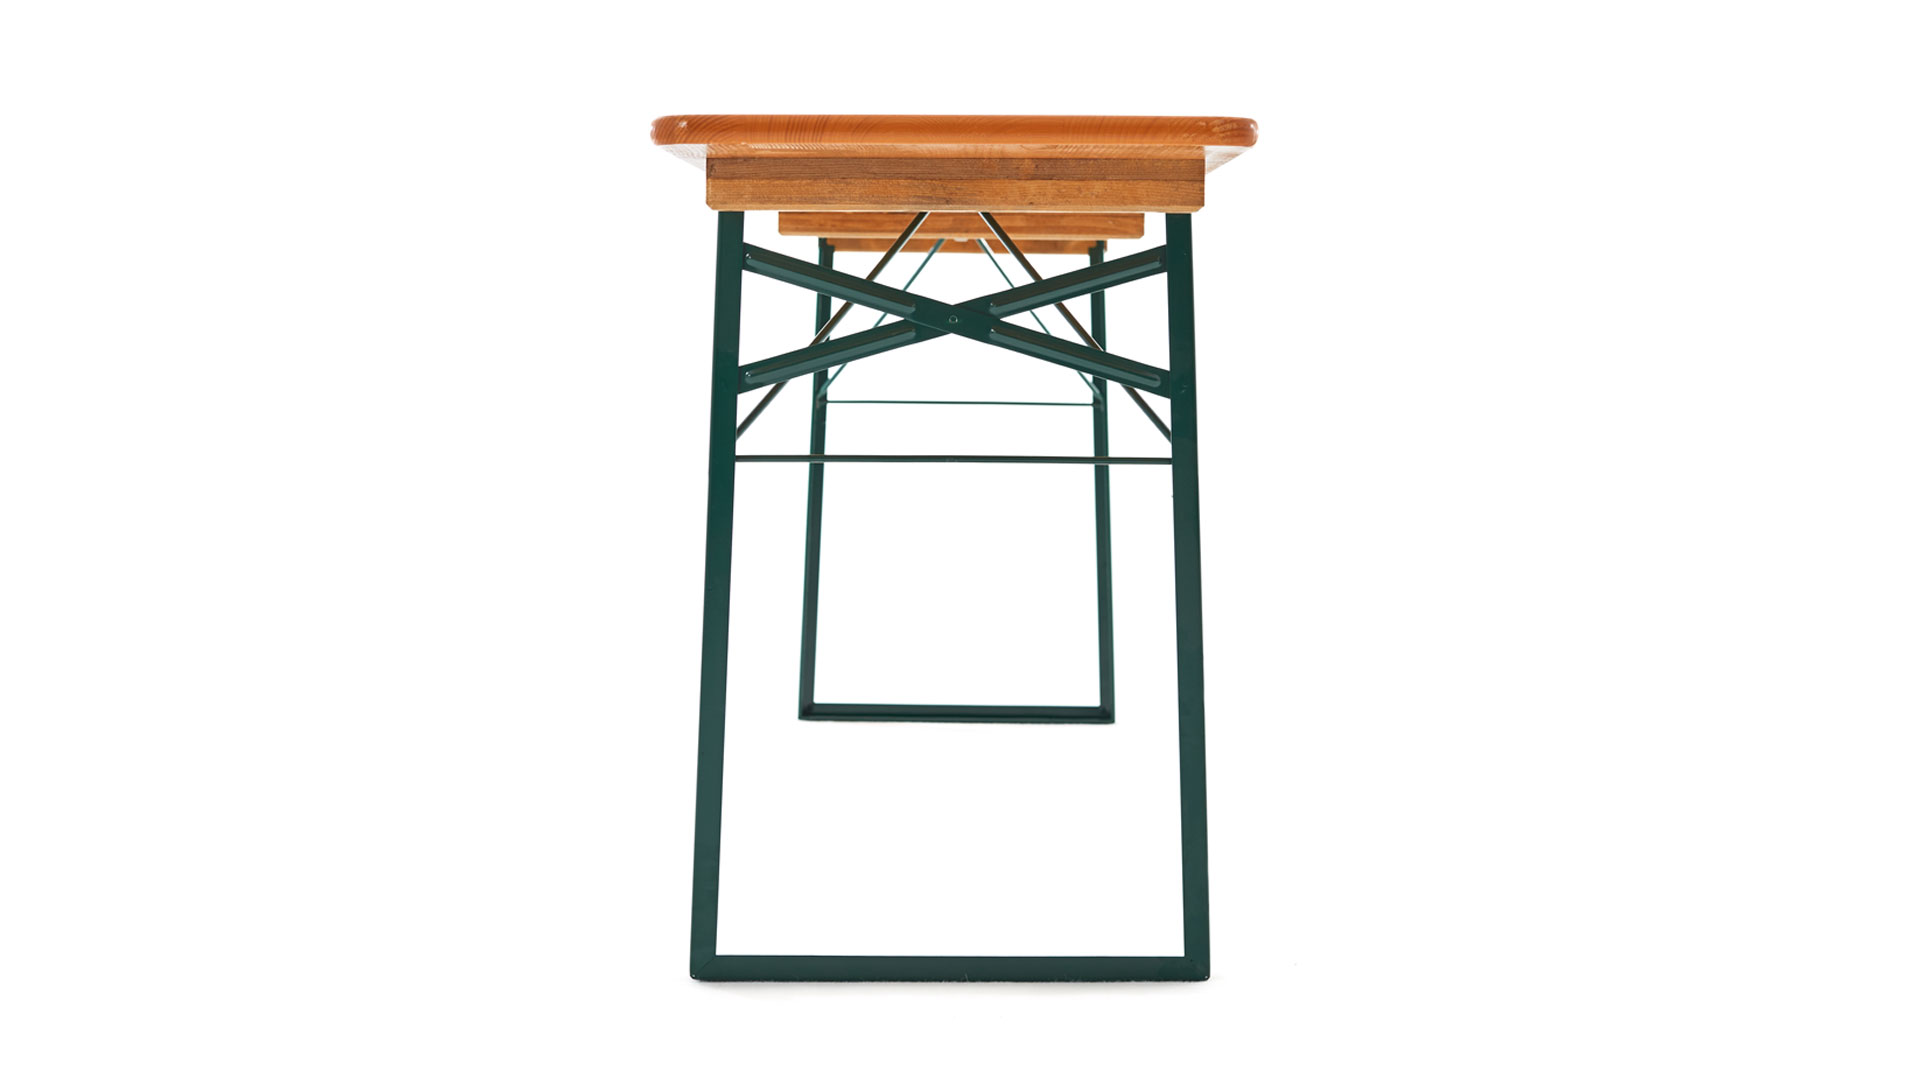 The front view of the classic beer table